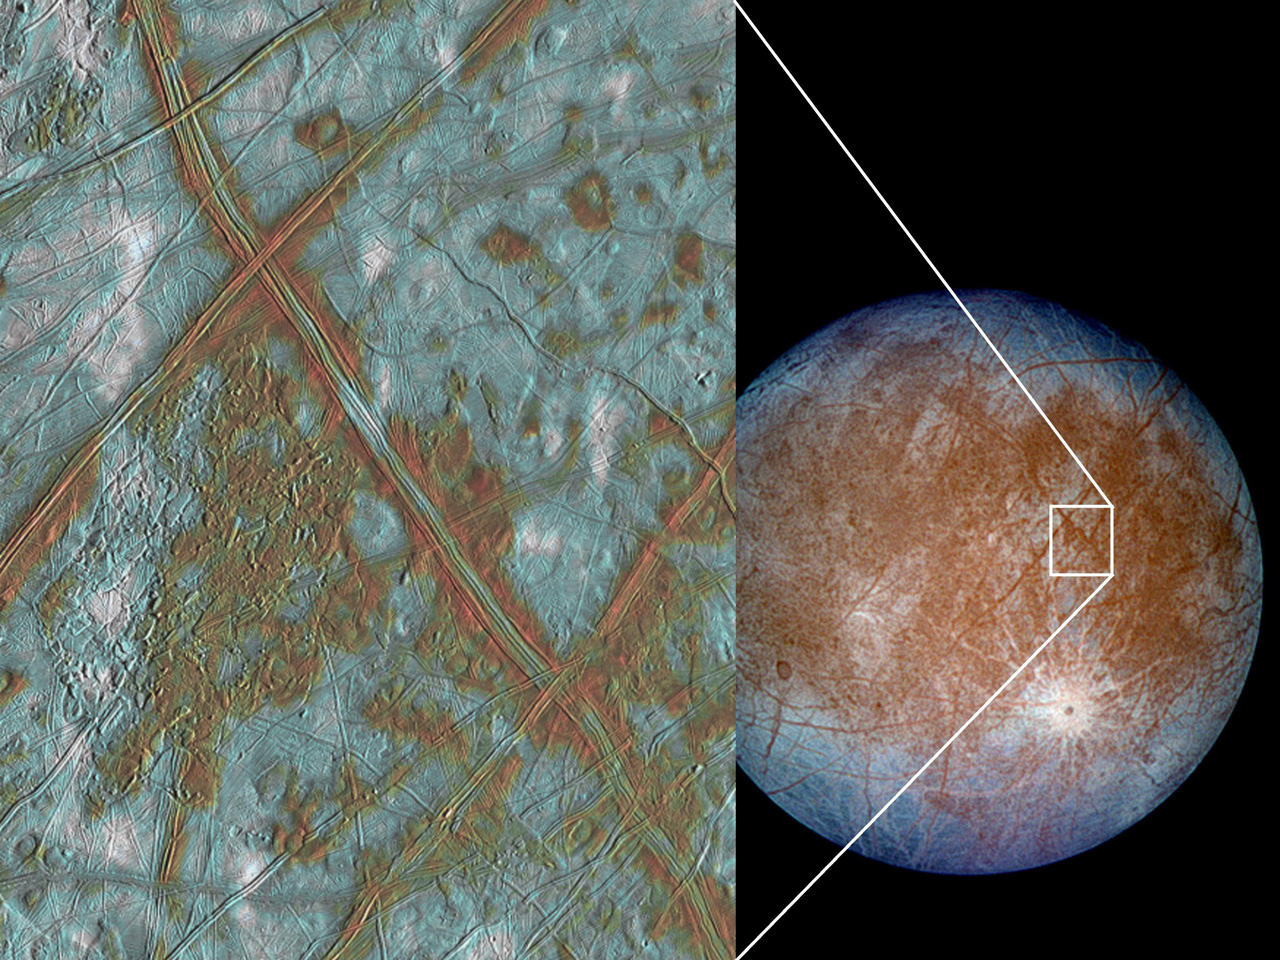 Pullout showing detail on Europa's surface.